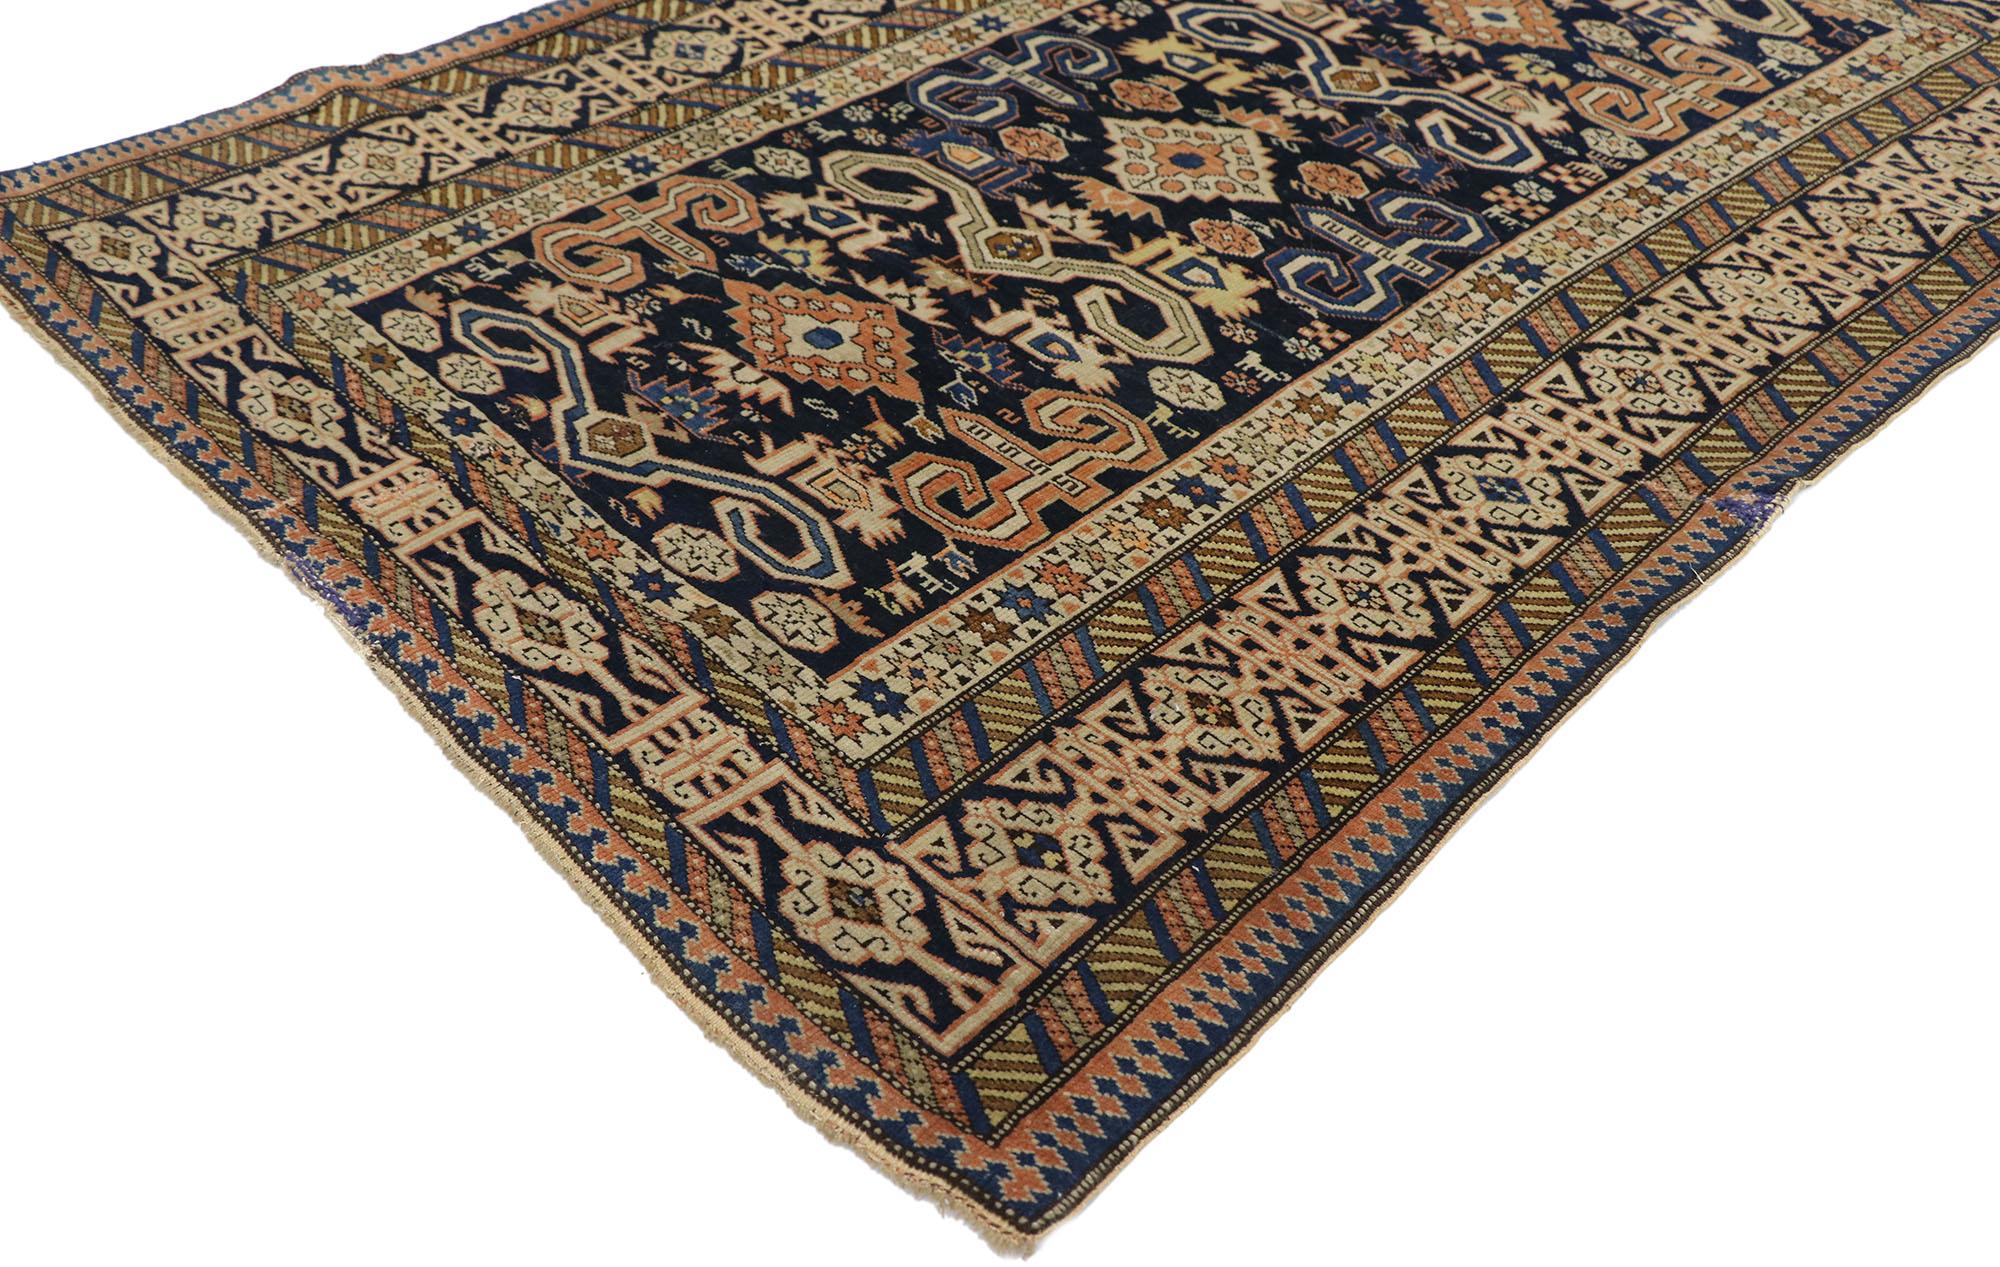 77658, antique Caucasian Shirvan Kuba rug with Tribal style. Give the look of woven wonders and nomadic charm with this hand-knotted wool antique Caucasian Shirvan Kuba rug. The navy blue field features a variety of ambiguous tribal motifs: Ram's